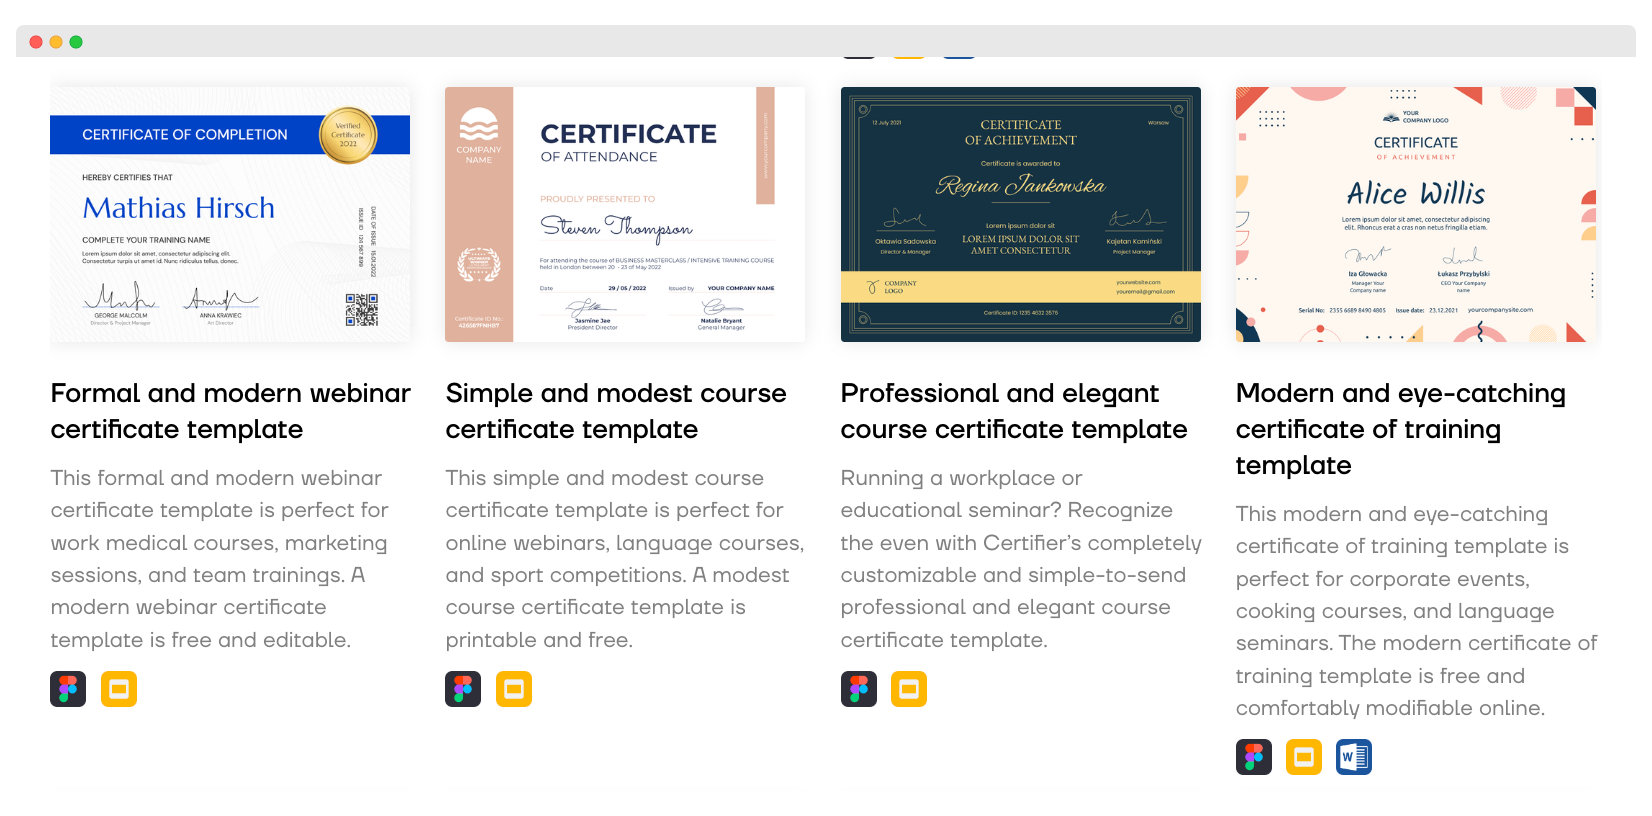 Ceritifer library of free certificate templates.